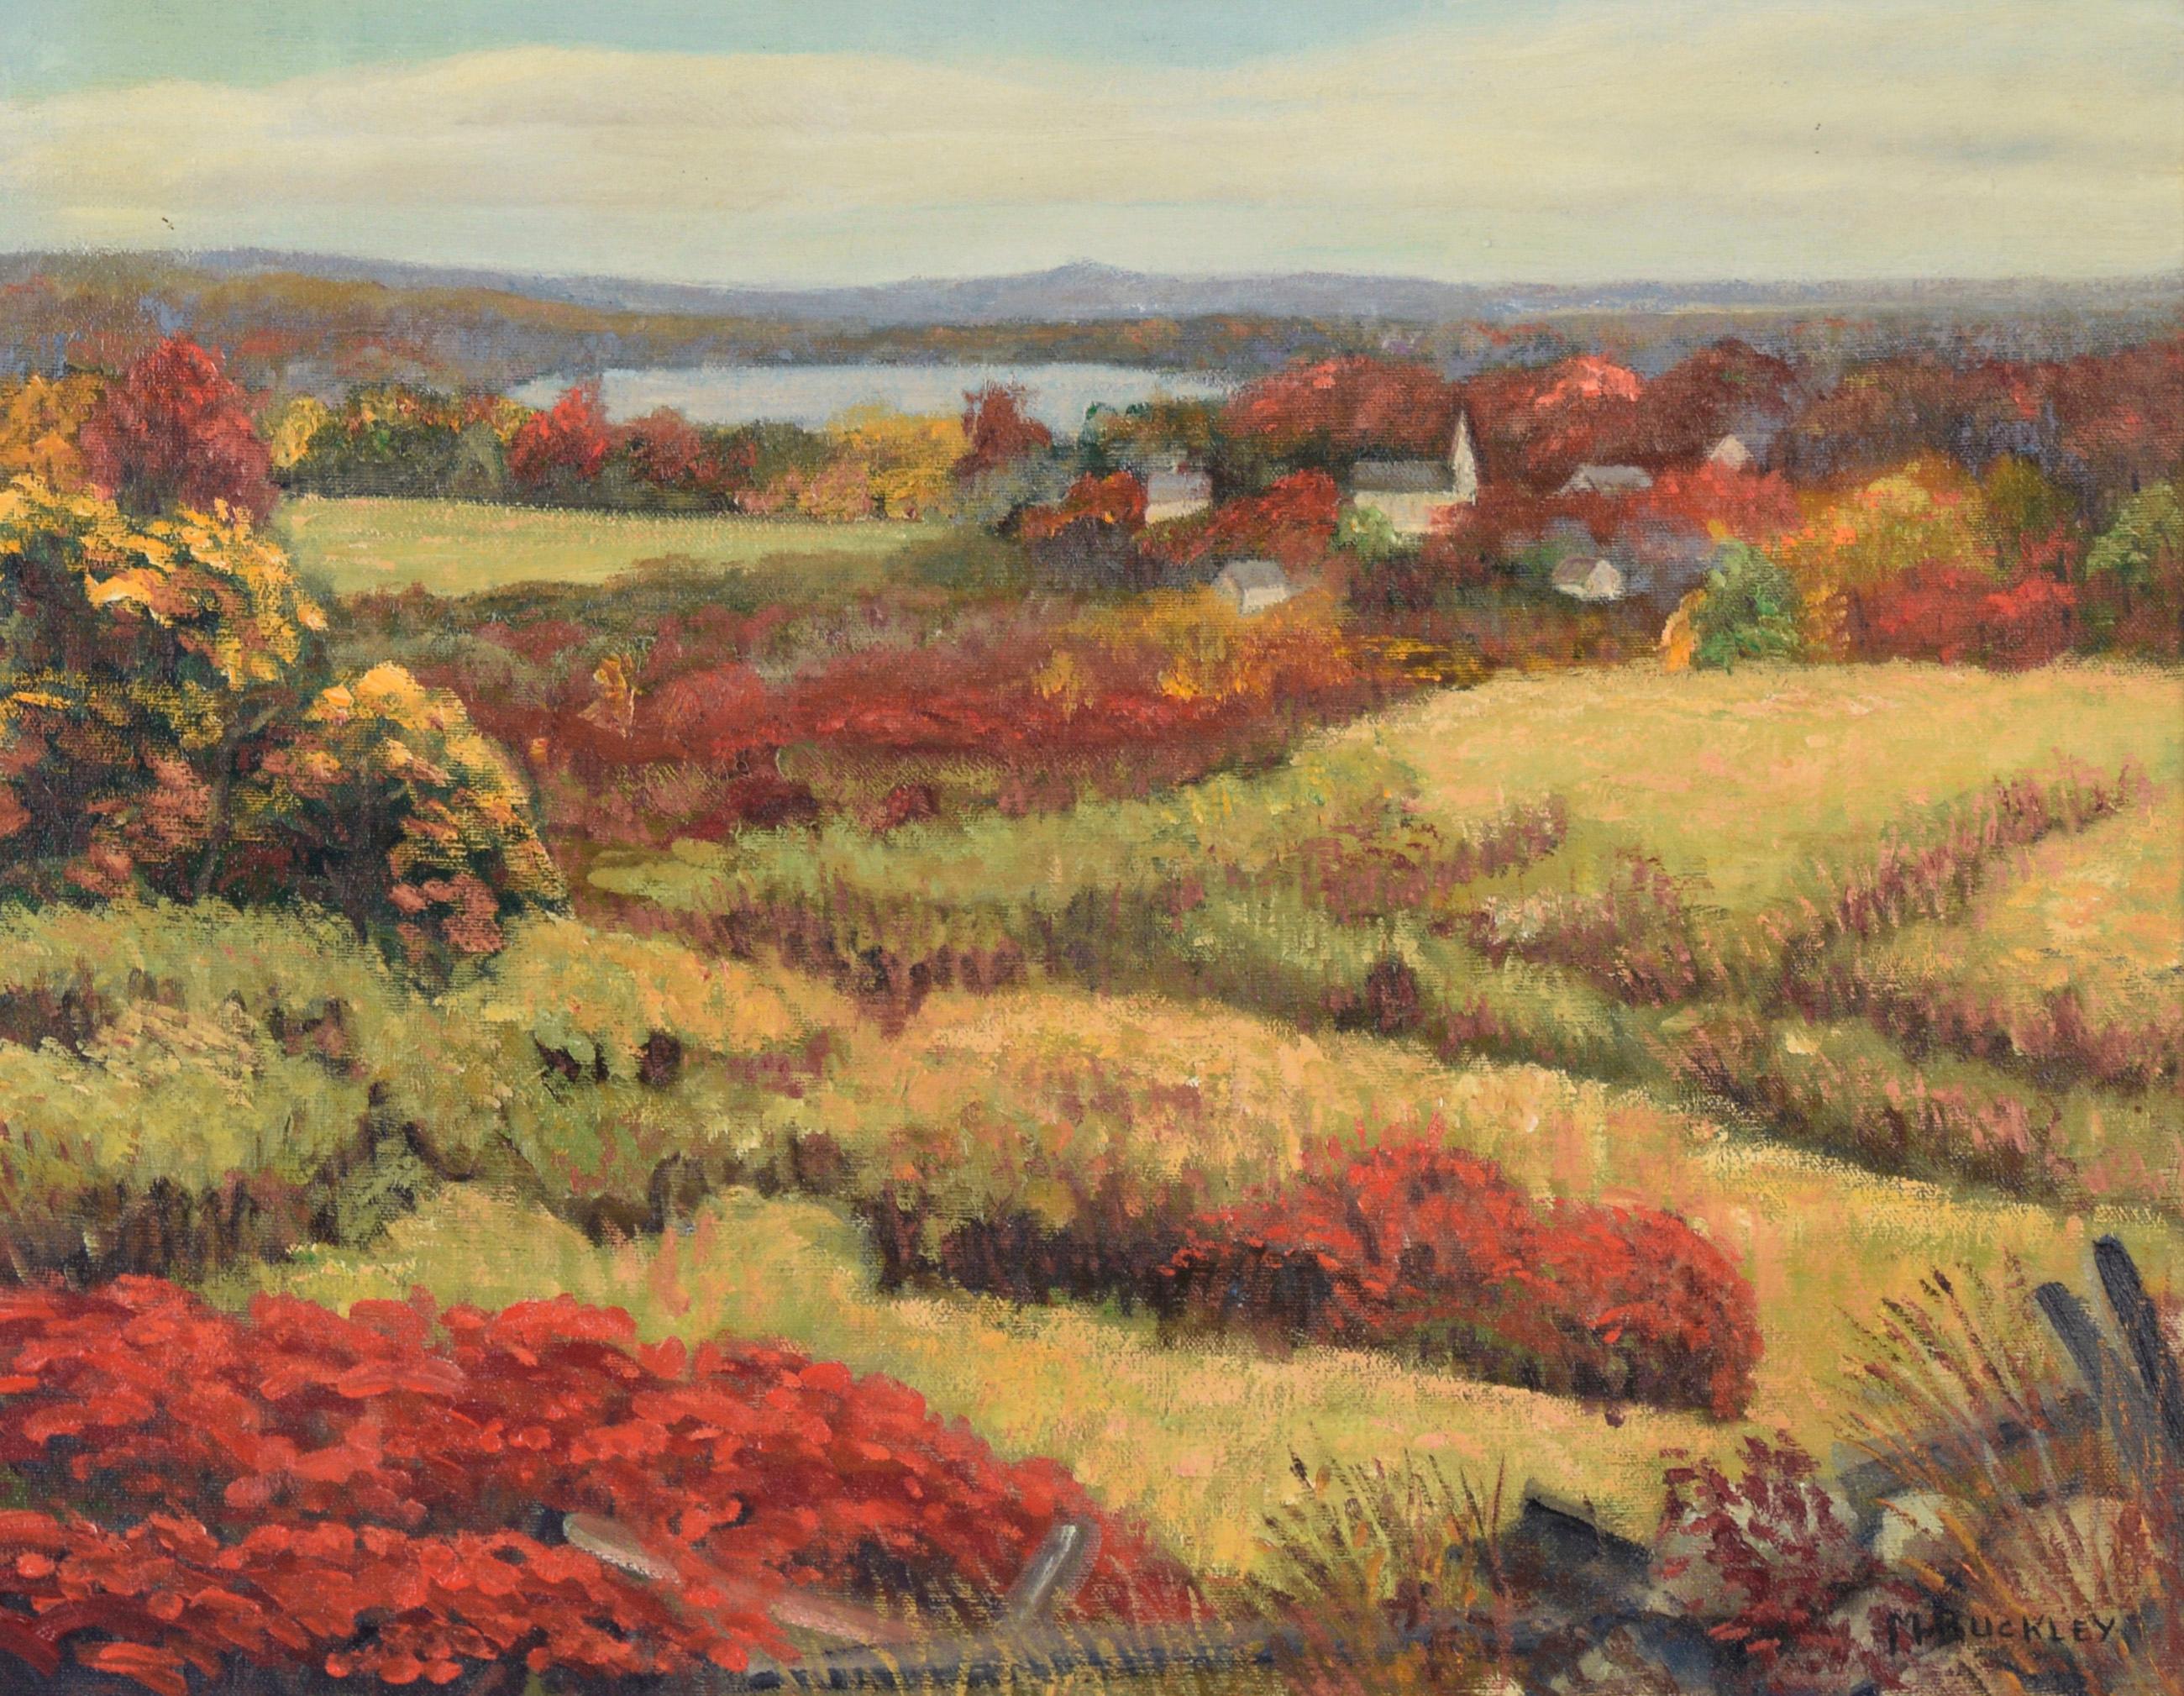 Poppy Fields Outside of Town - Landscape in Oil on Canvas - Painting by M. Buckley